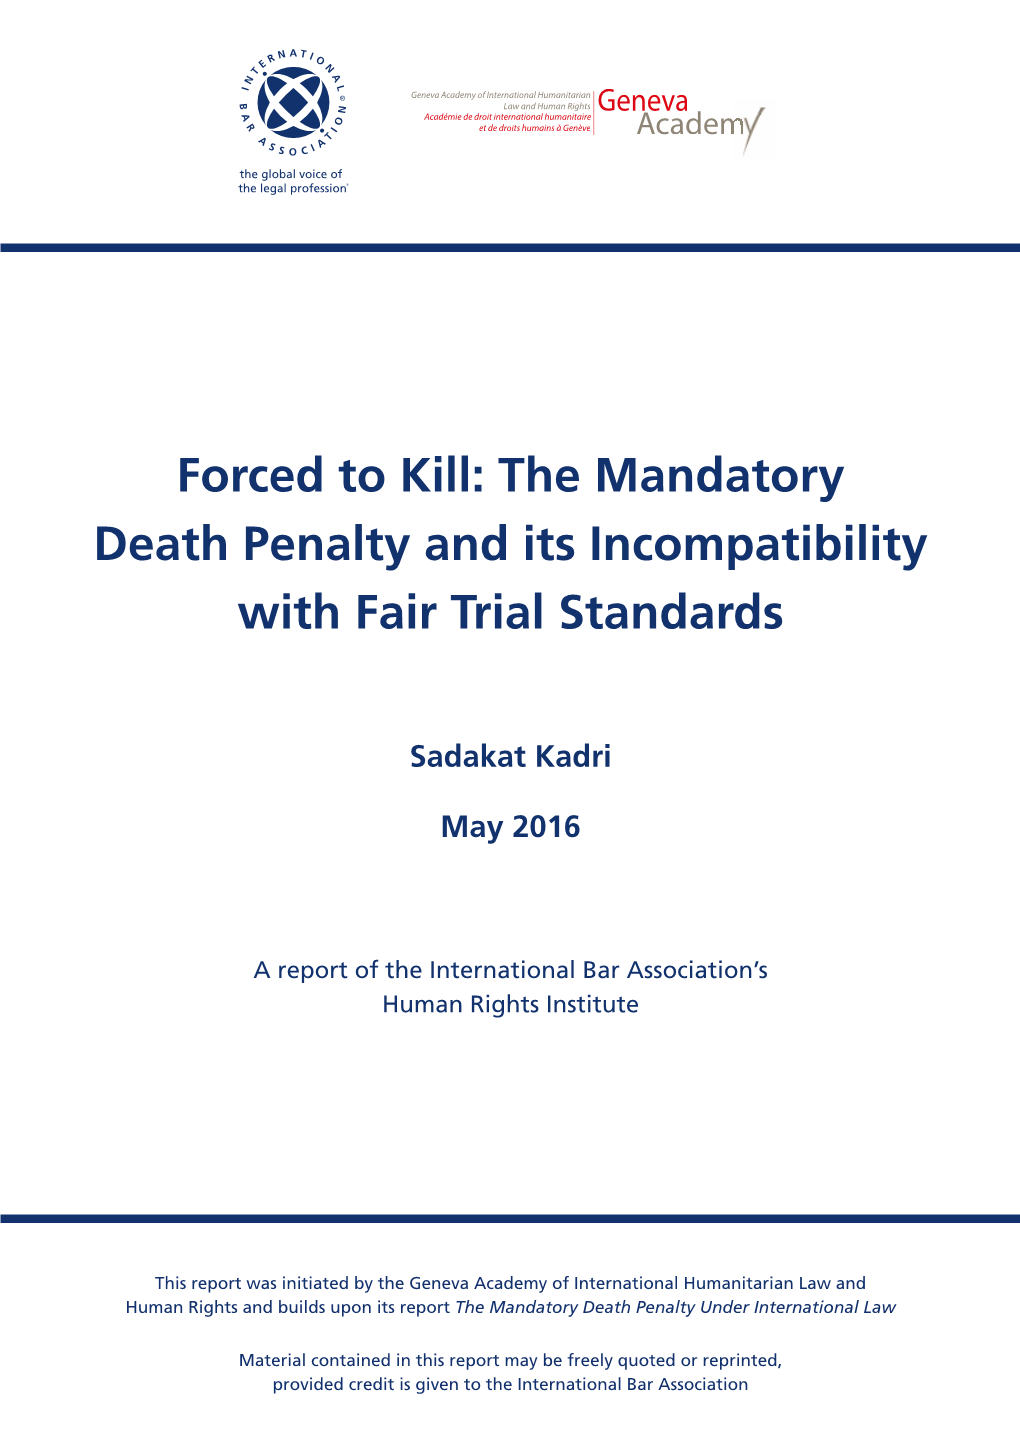 The Mandatory Death Penalty and Its Incompatibility with Fair Trial Standards